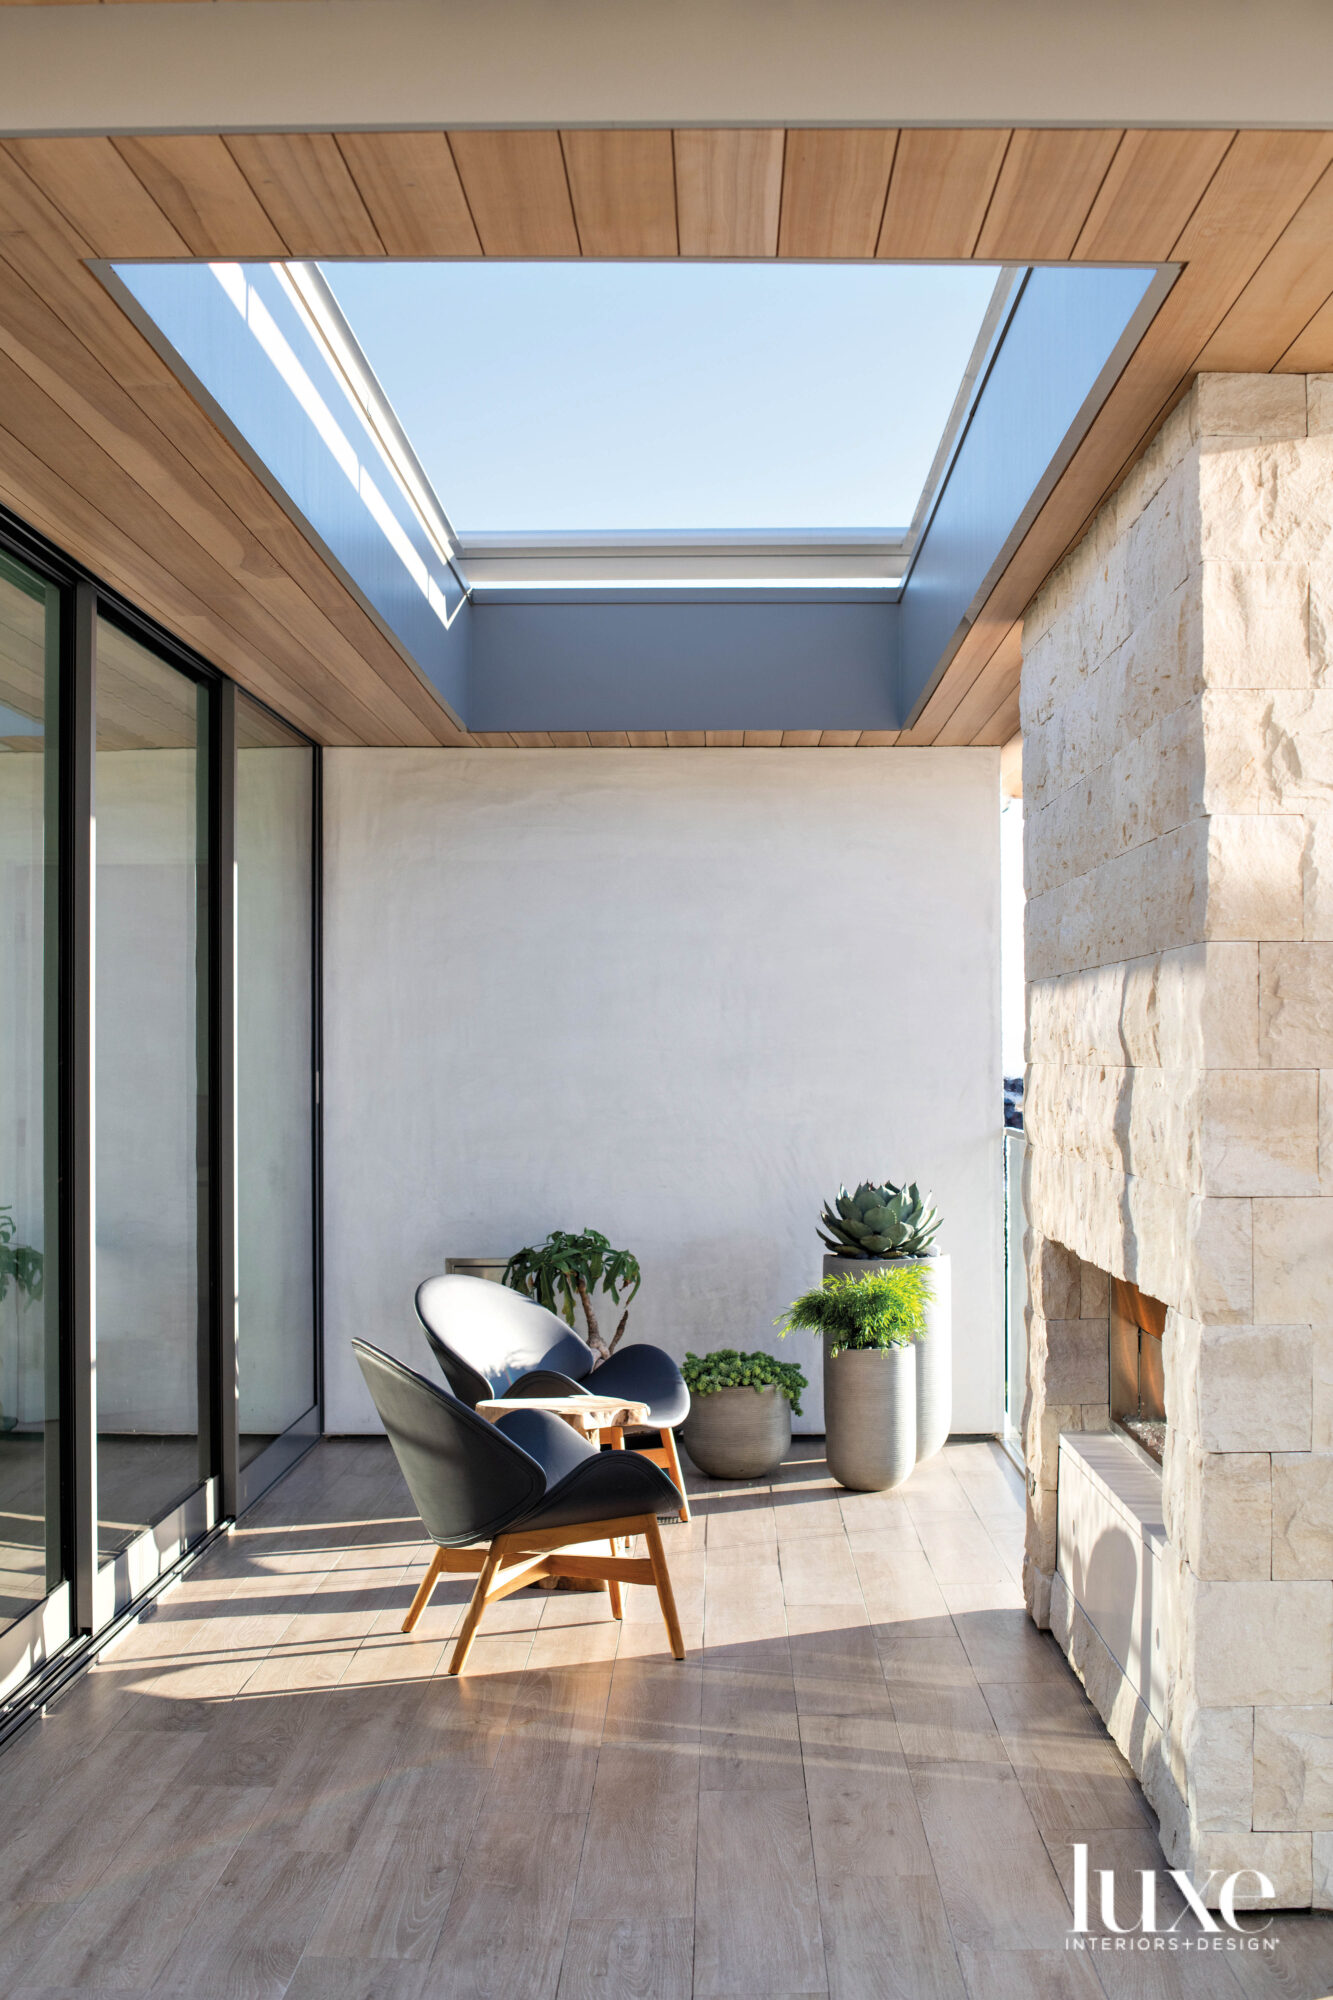 Terrace with skylight above and...